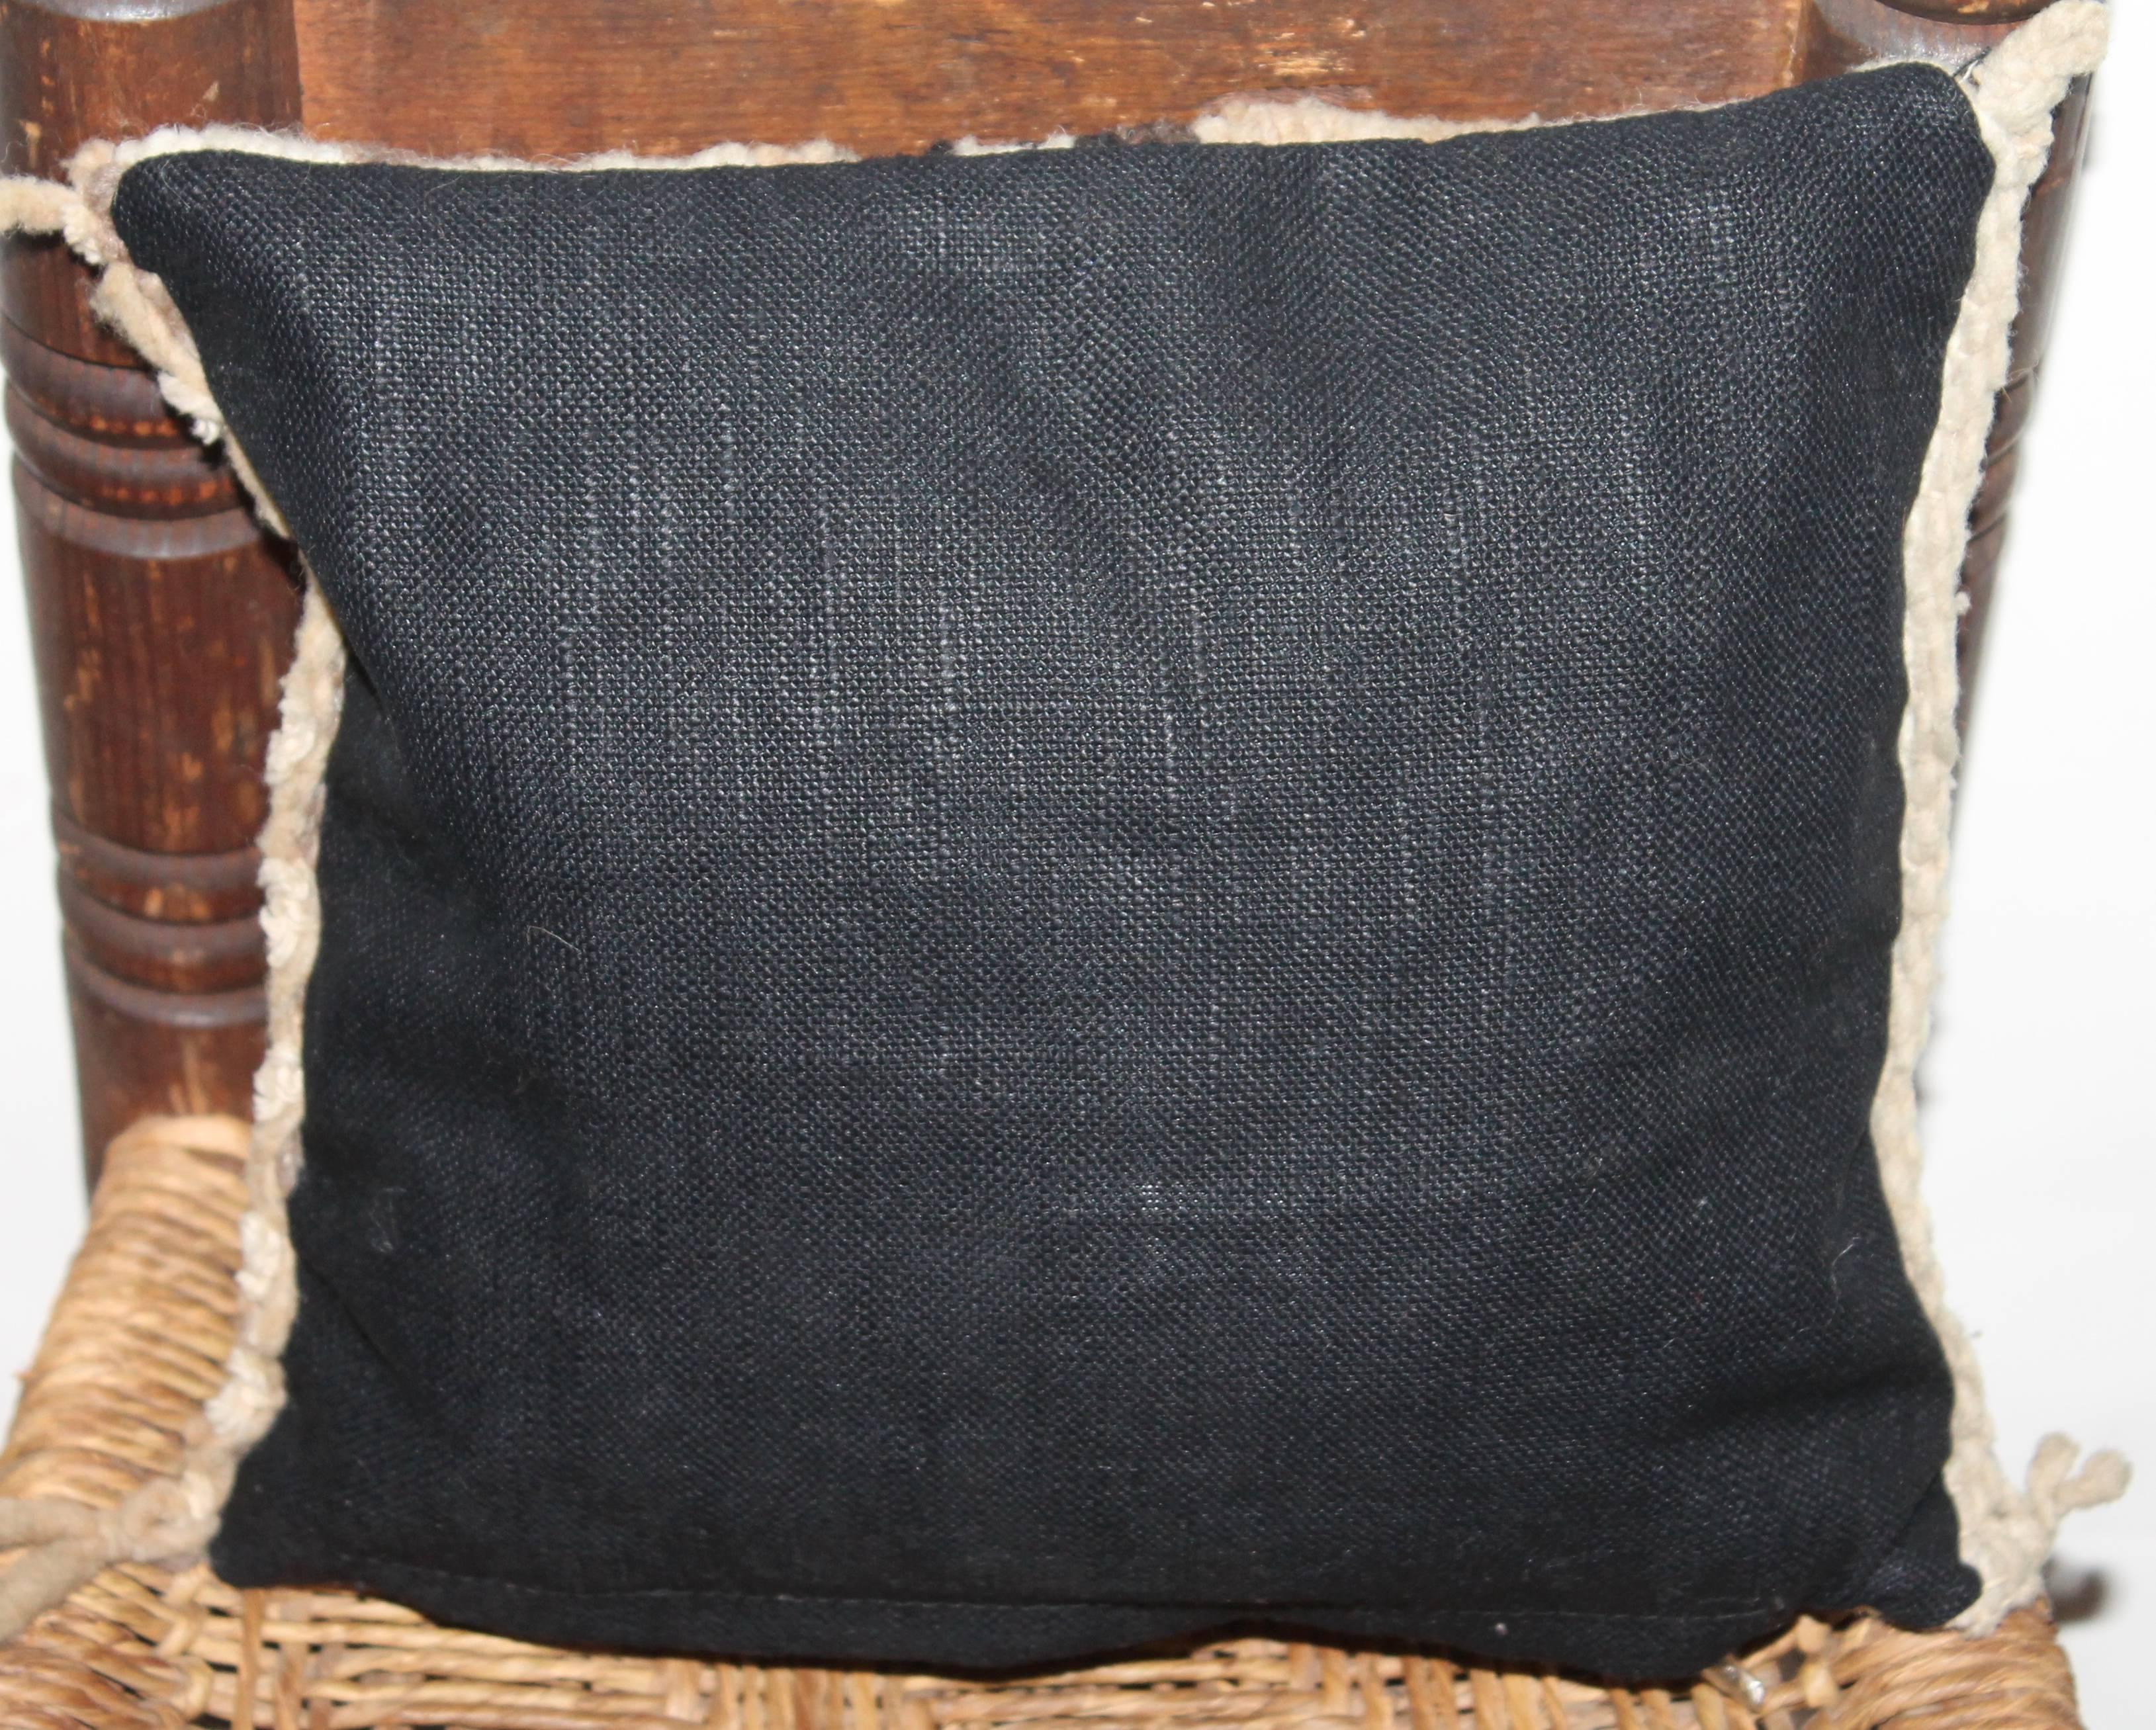 American Early Small Navajo Indian Weaving Pillow